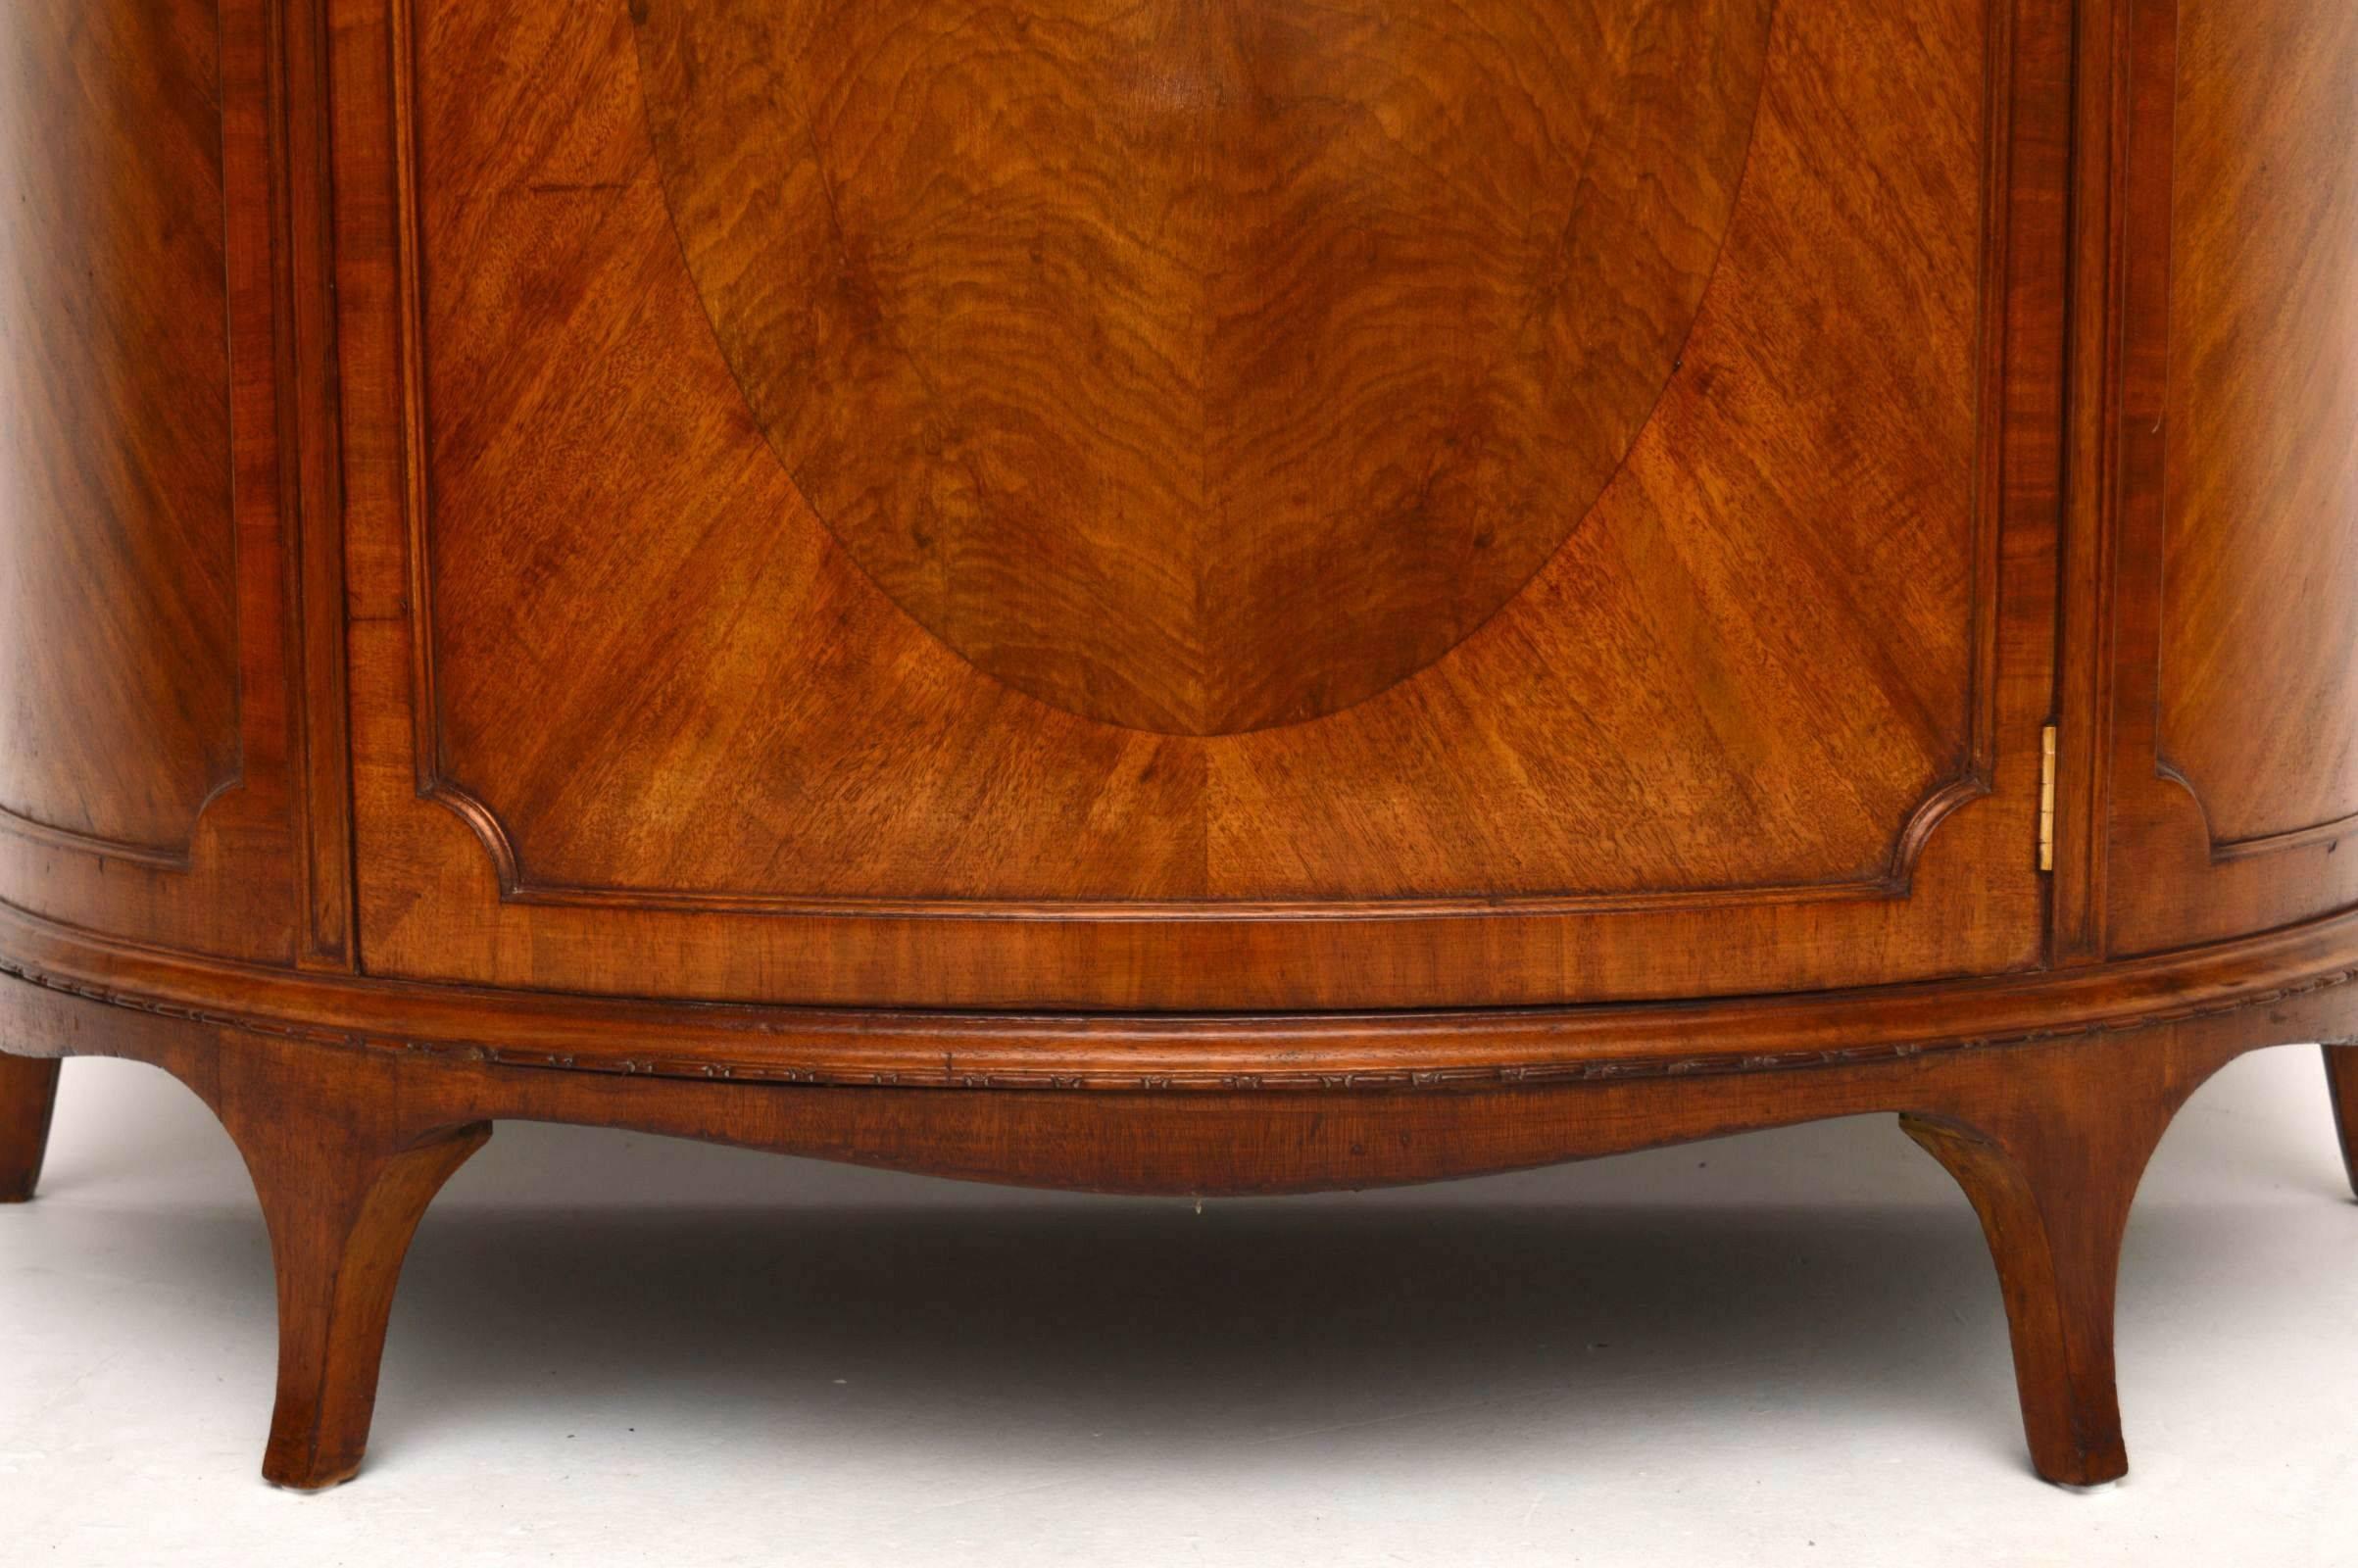 Impressive and practicable antique mahogany cabinet with a curved front. This piece is in good original condition, with a lovely mellow color and has loads of character. It has a solid mahogany top with a gadrooned edge. The middle door has an inset